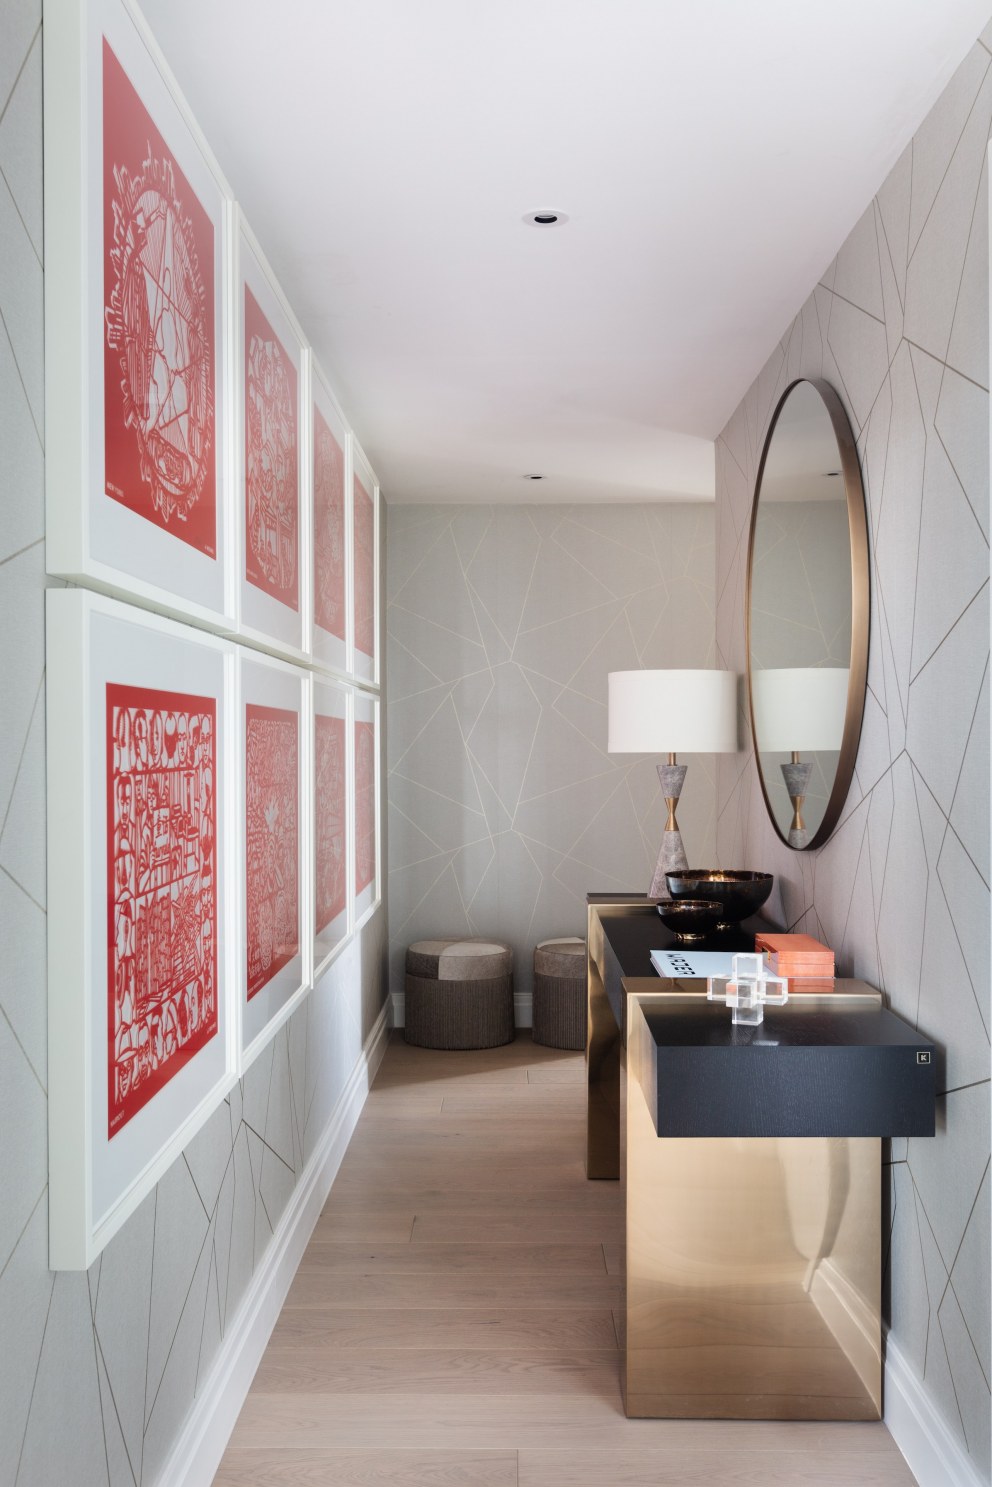 Park Place | Curated art work | Interior Designers